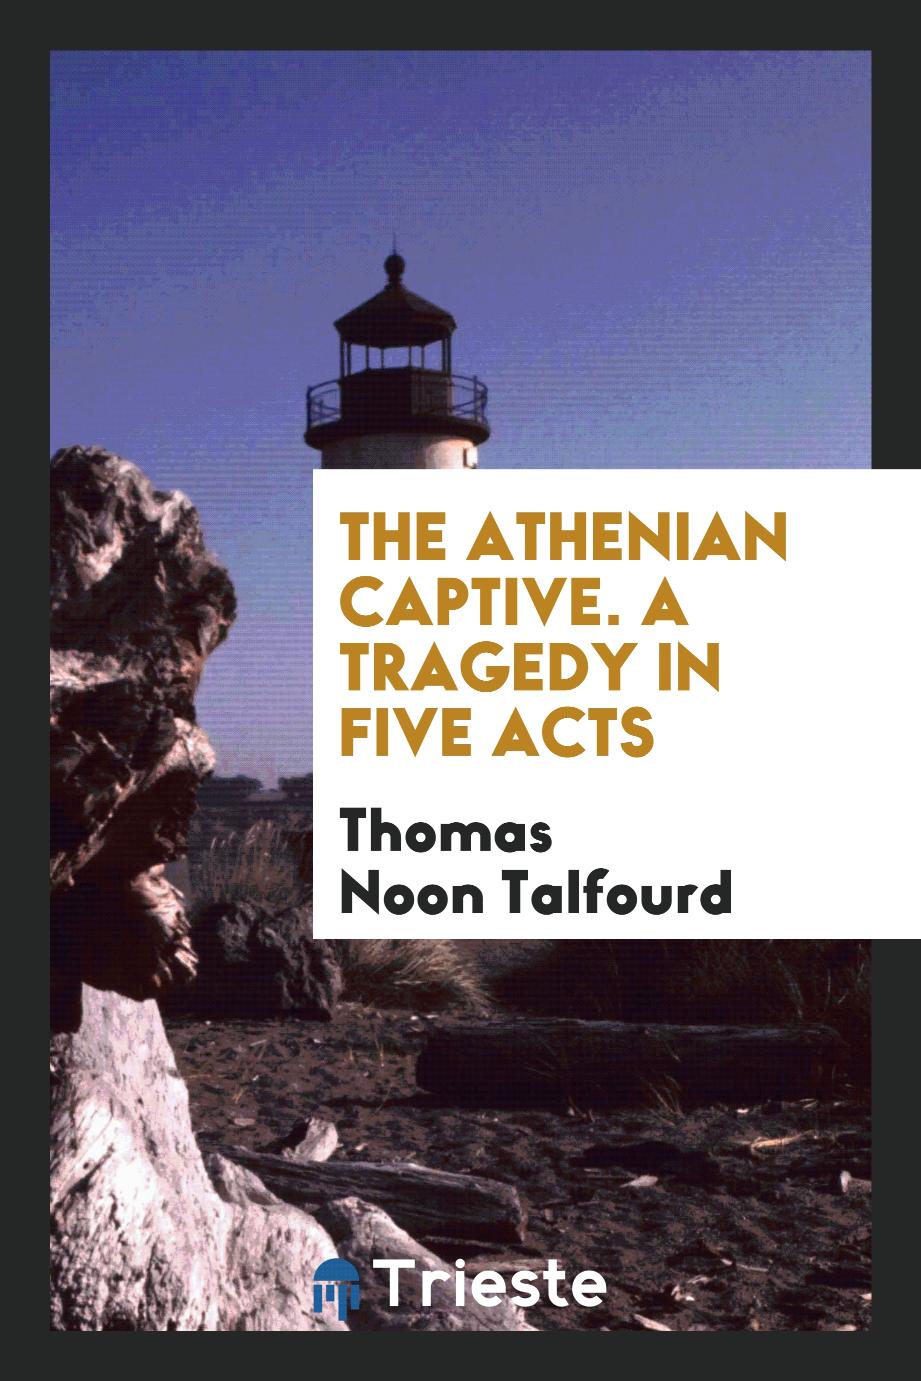 The Athenian Captive. A Tragedy in Five Acts